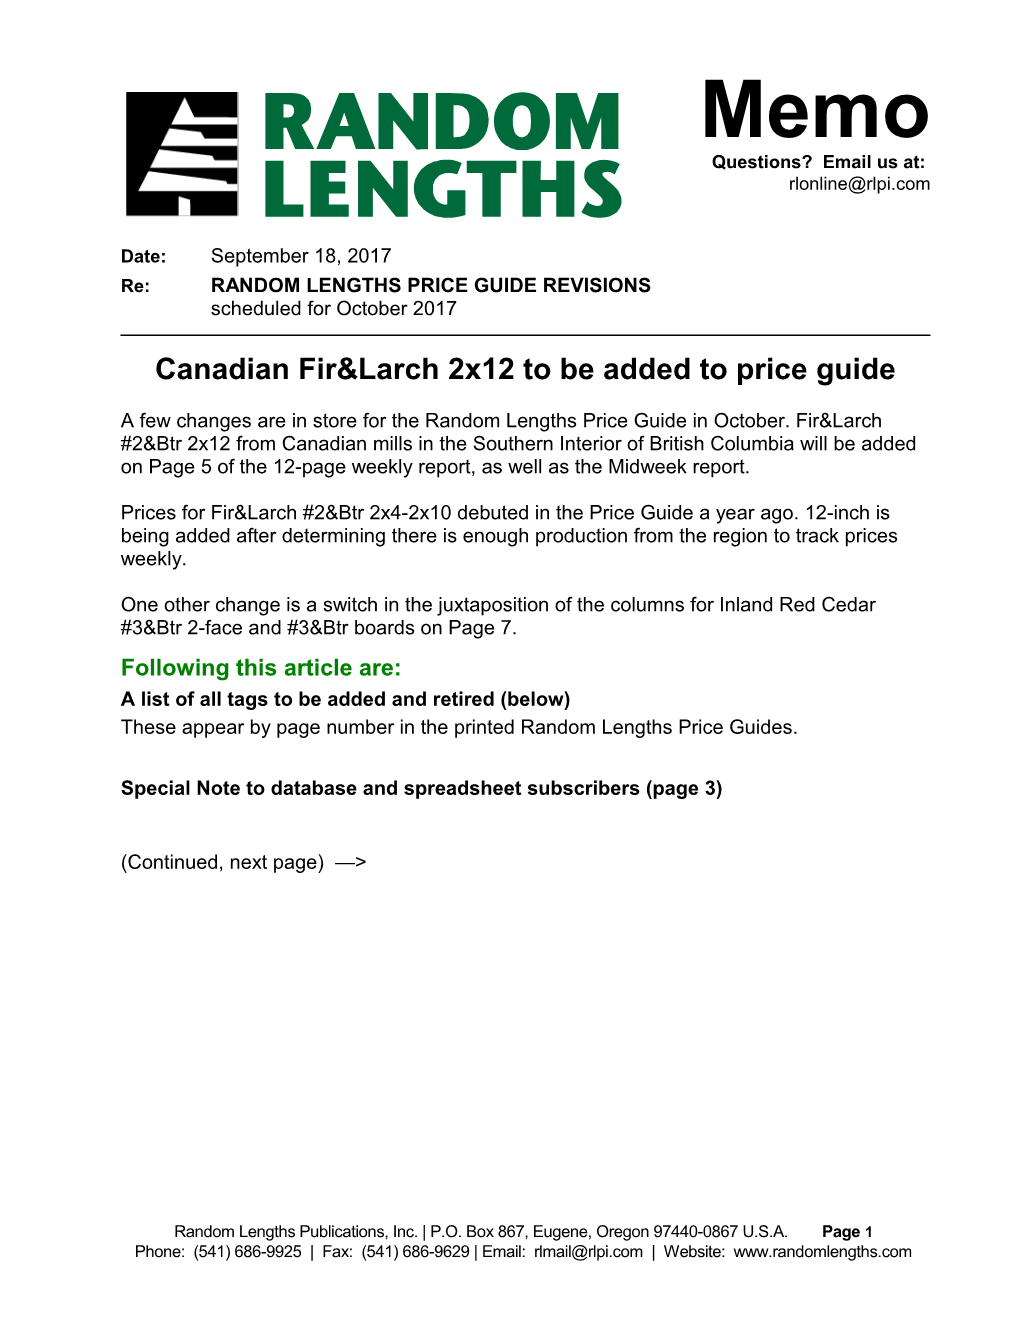 Canadian Fir&Larch 2X12 to Be Added to Price Guide